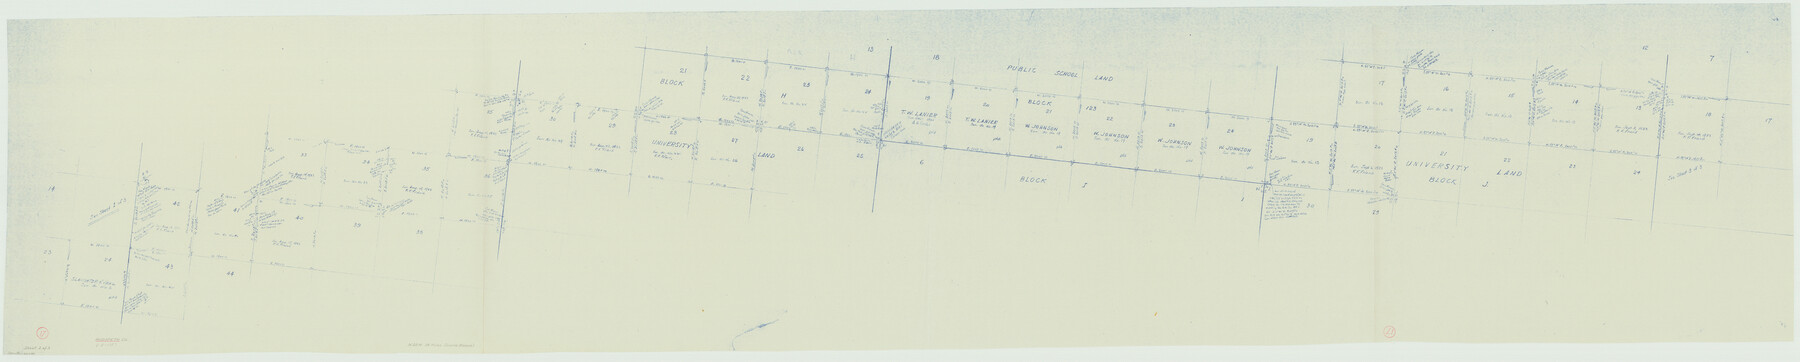 66299, Hudspeth County Working Sketch 17, General Map Collection